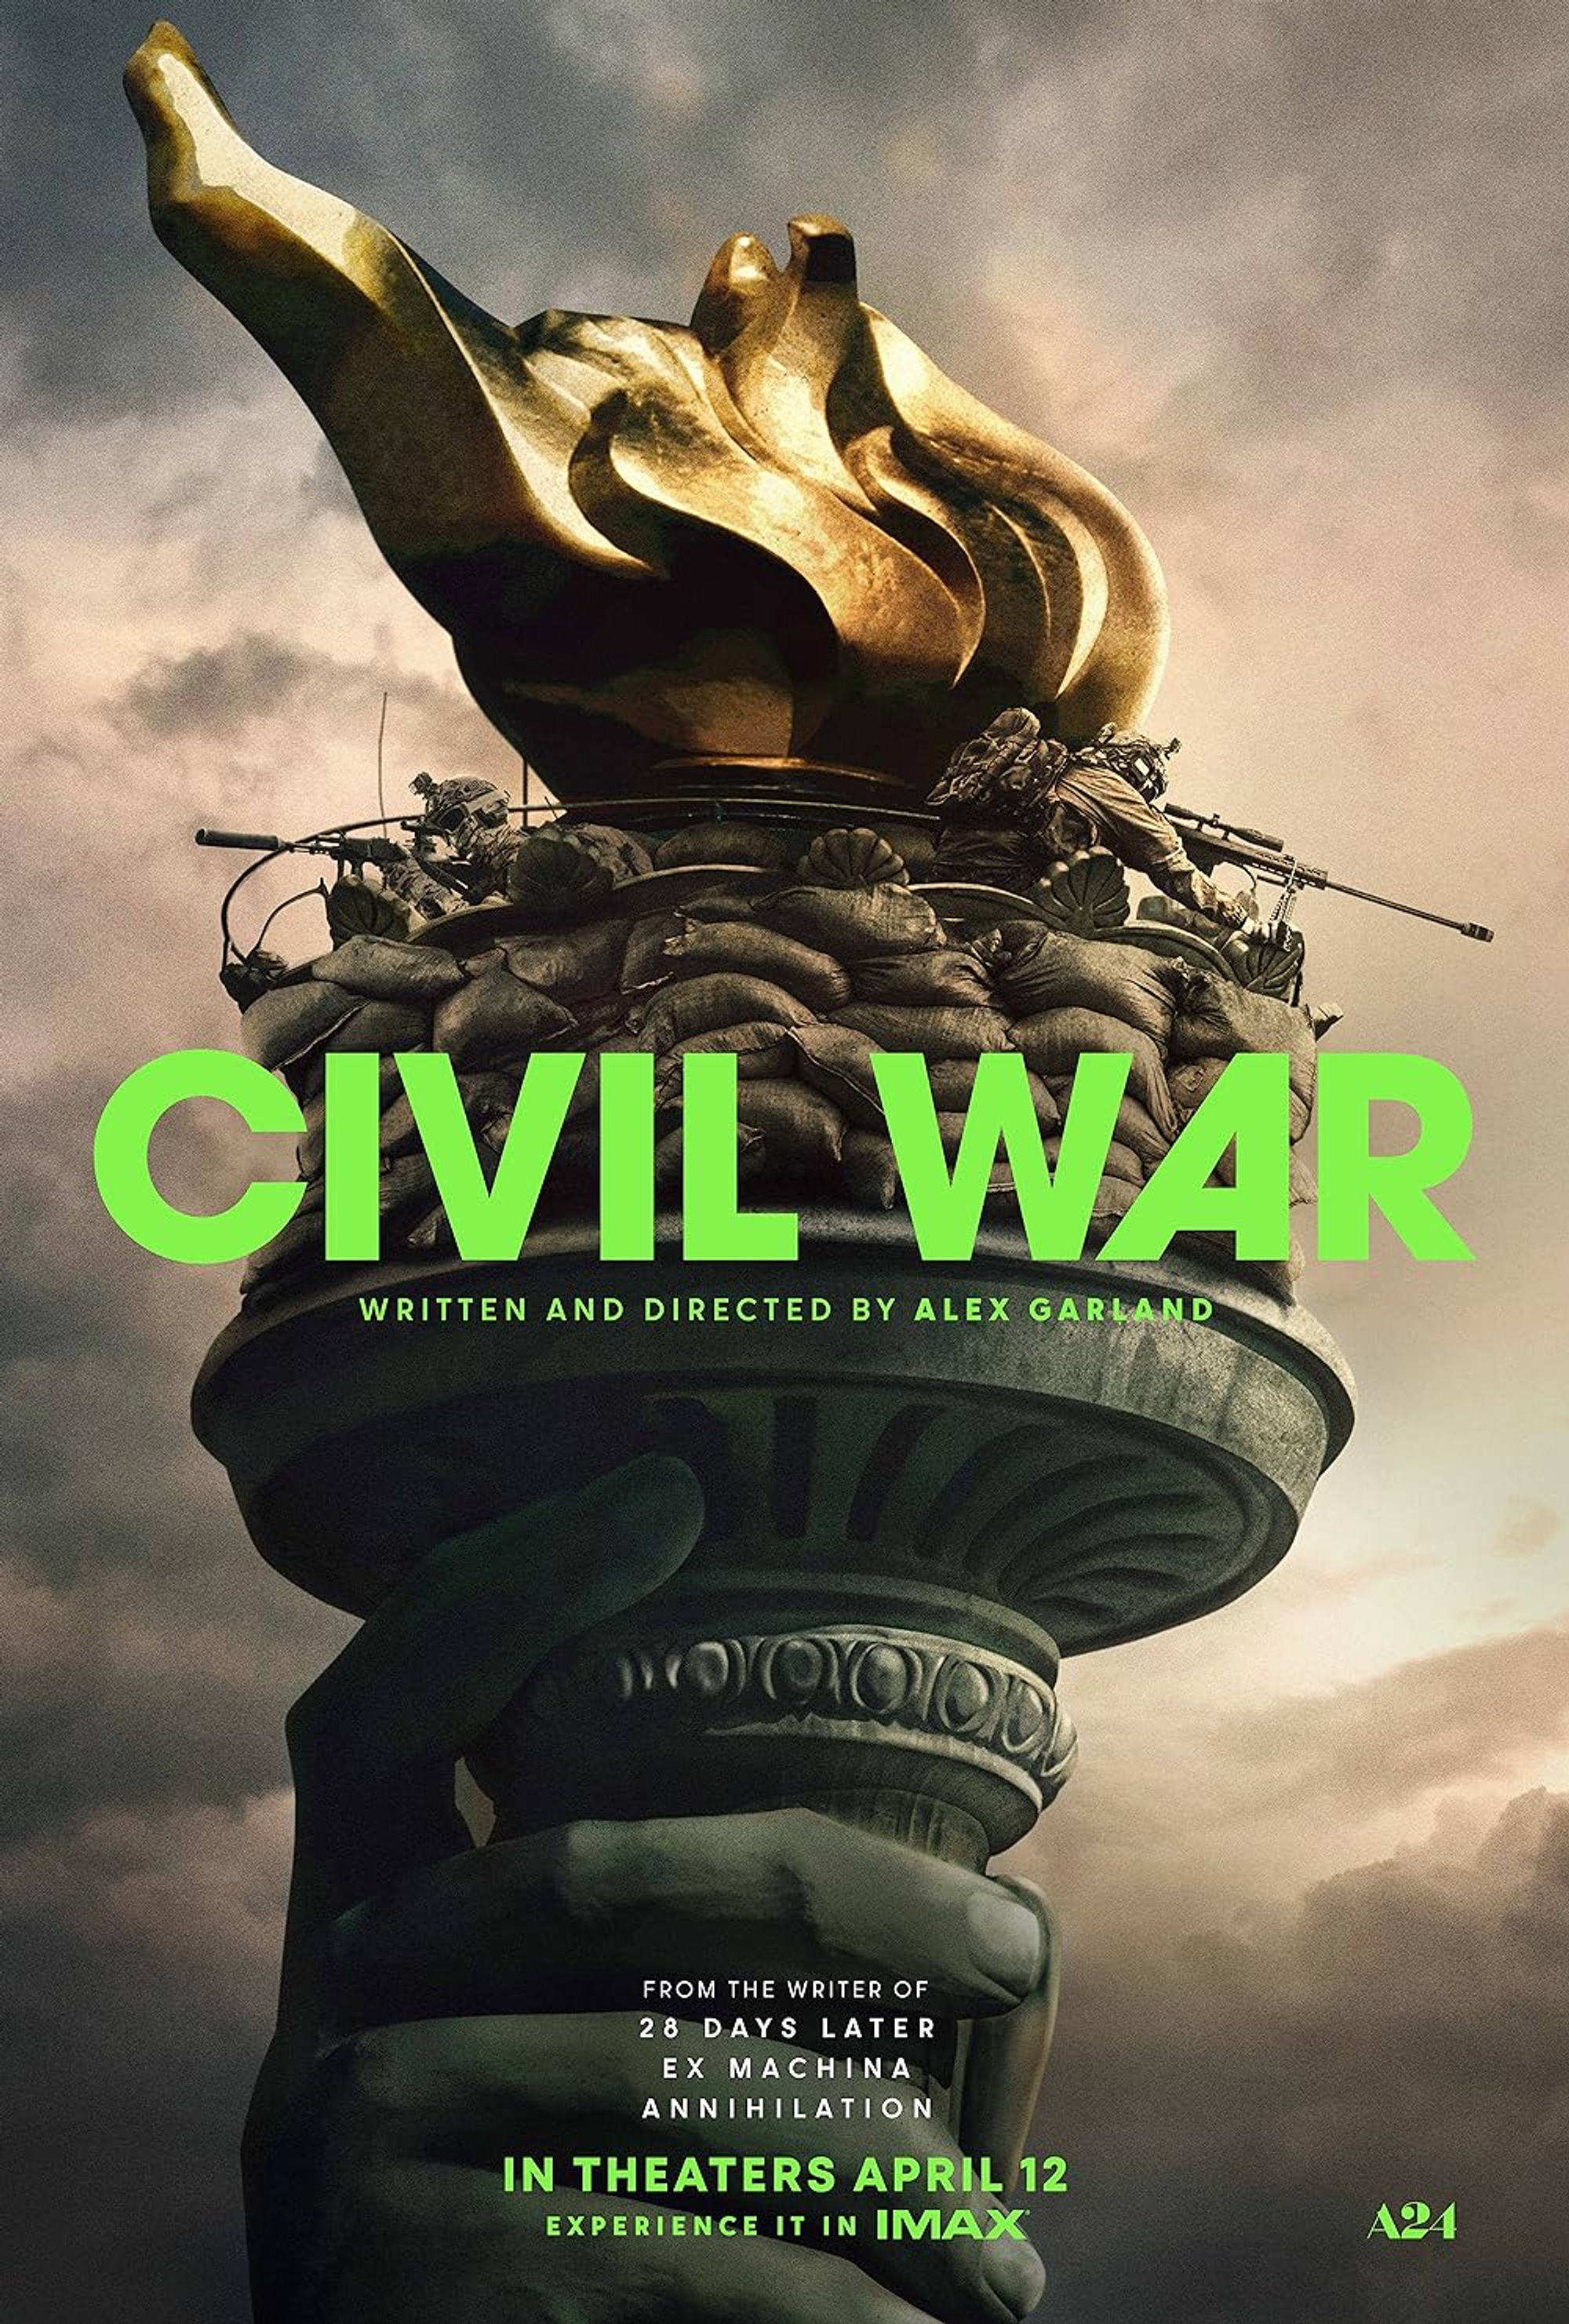 Theatrical release poster showing the torch of the Liberty Statue. There are snipers standing on the sconce of the torch and aiming downward. The title reads, “Civil War: Written and directed by Alex Garland.”